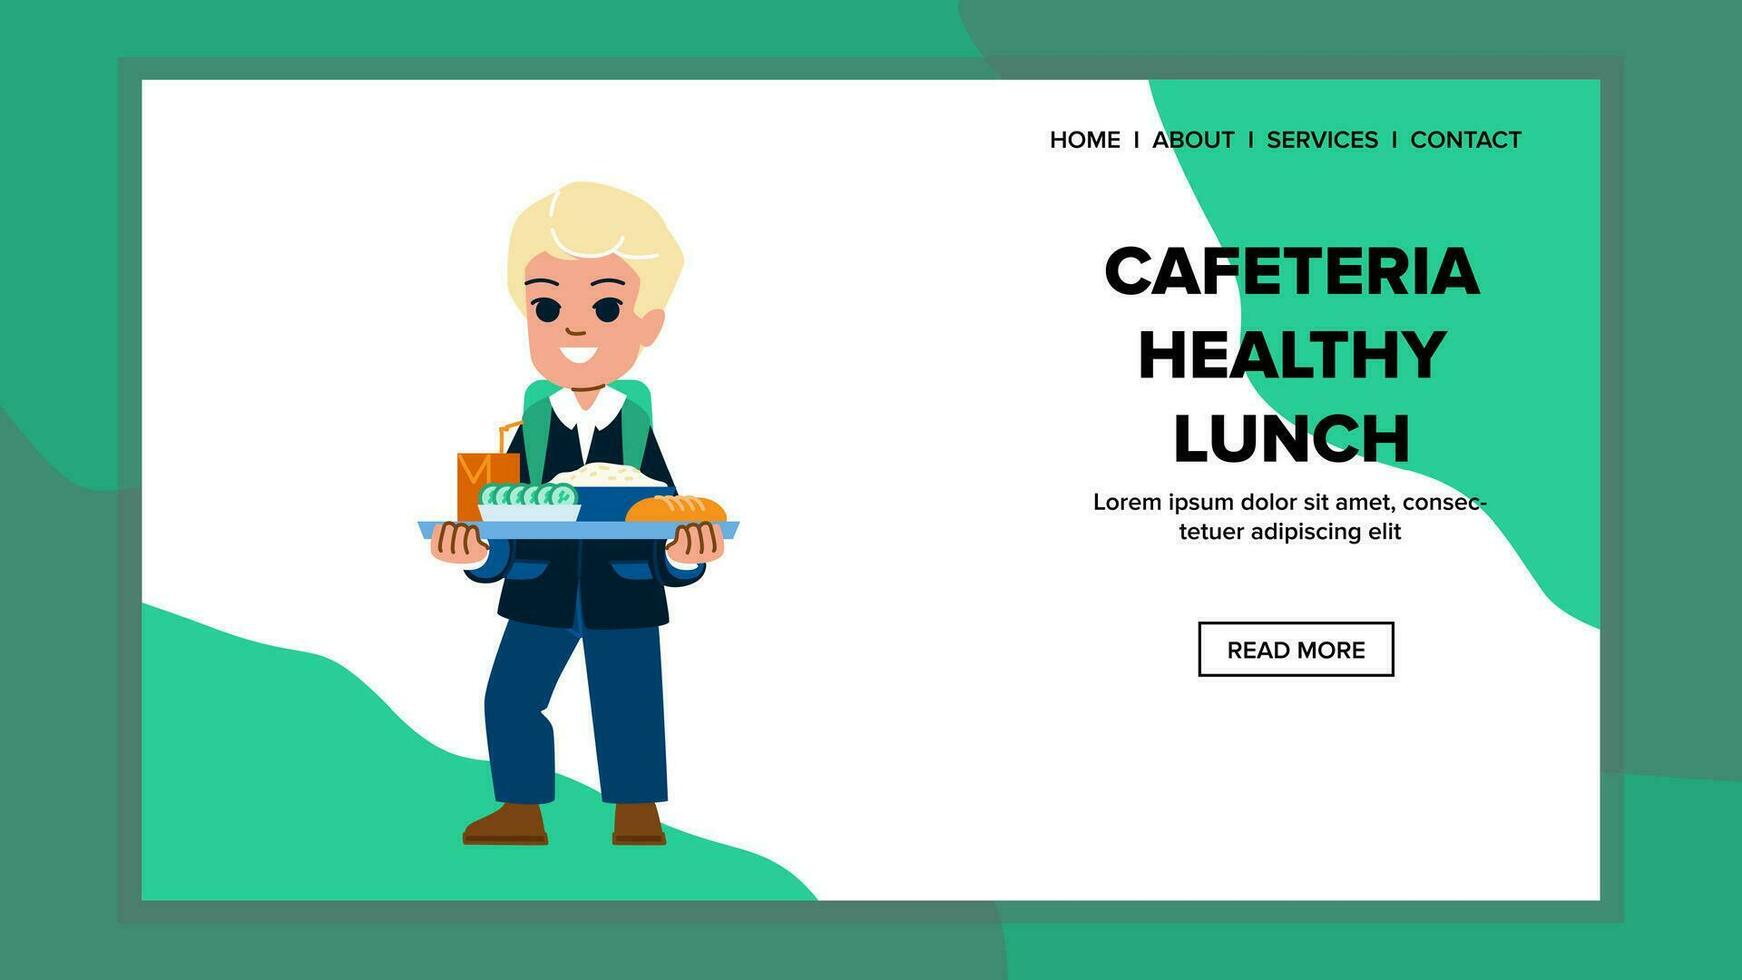 meal cafeteria healthy lunch vector